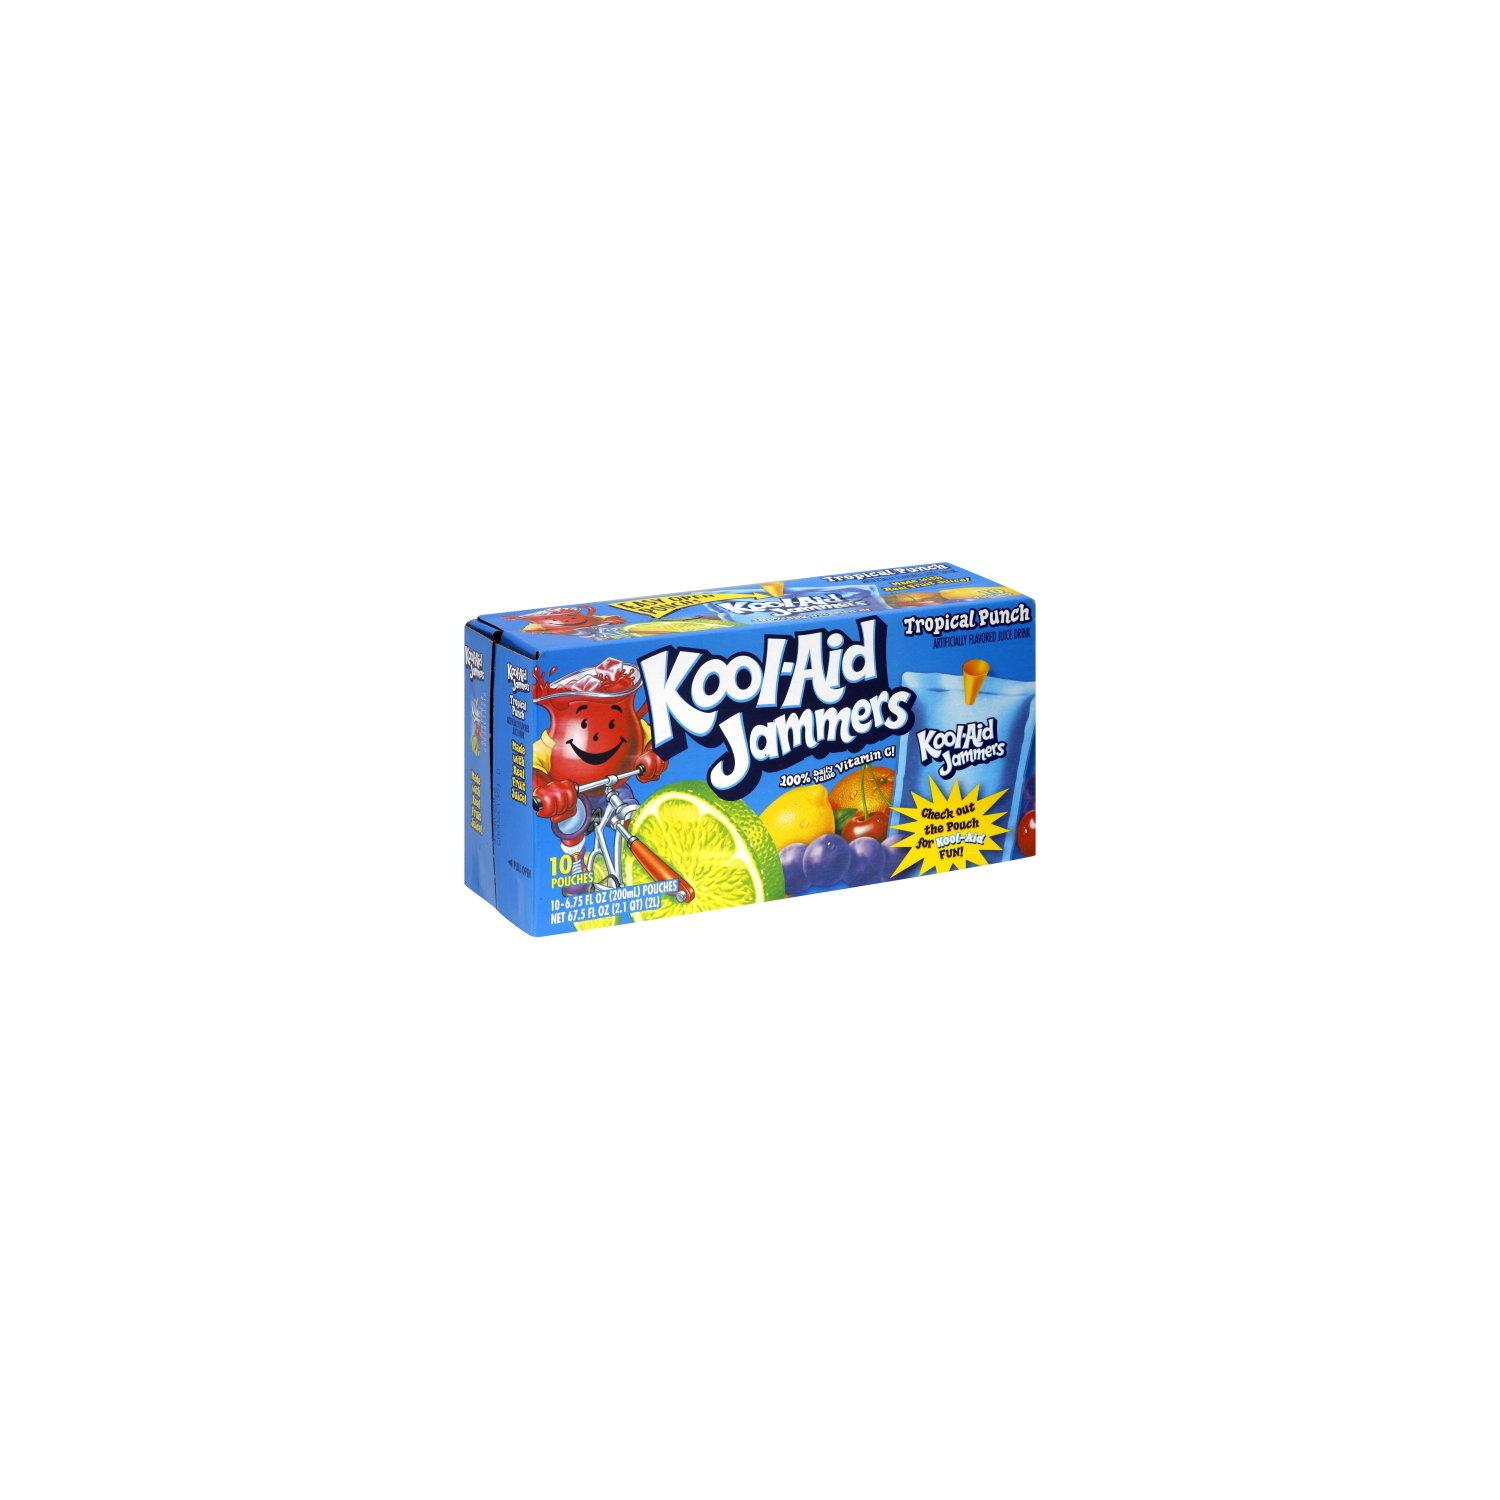 Kool-Aid Gum | Kool-Aid gum makes a great snack, fits perfectly in your  pocket, purse, backpack, or lunchbox! | By International FoodsFacebook